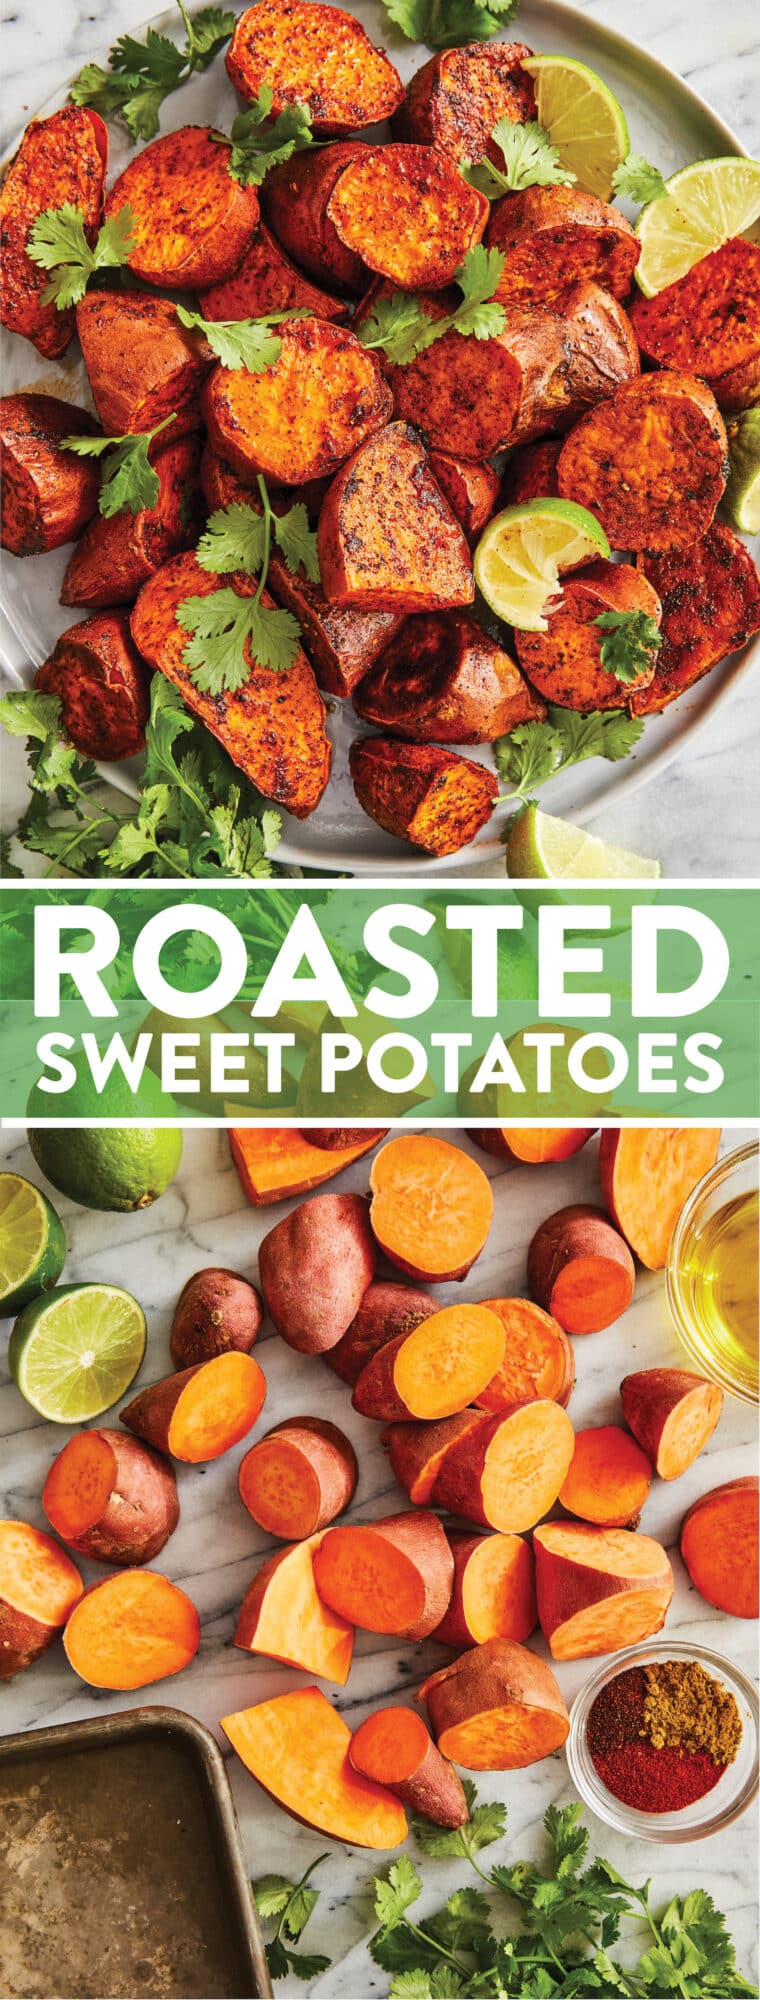 Roasted Sweet Potatoes - Amazingly crispy-tender sweet potatoes, roasted to perfection.  Such a quick, easy, veggie side dish for any meal!